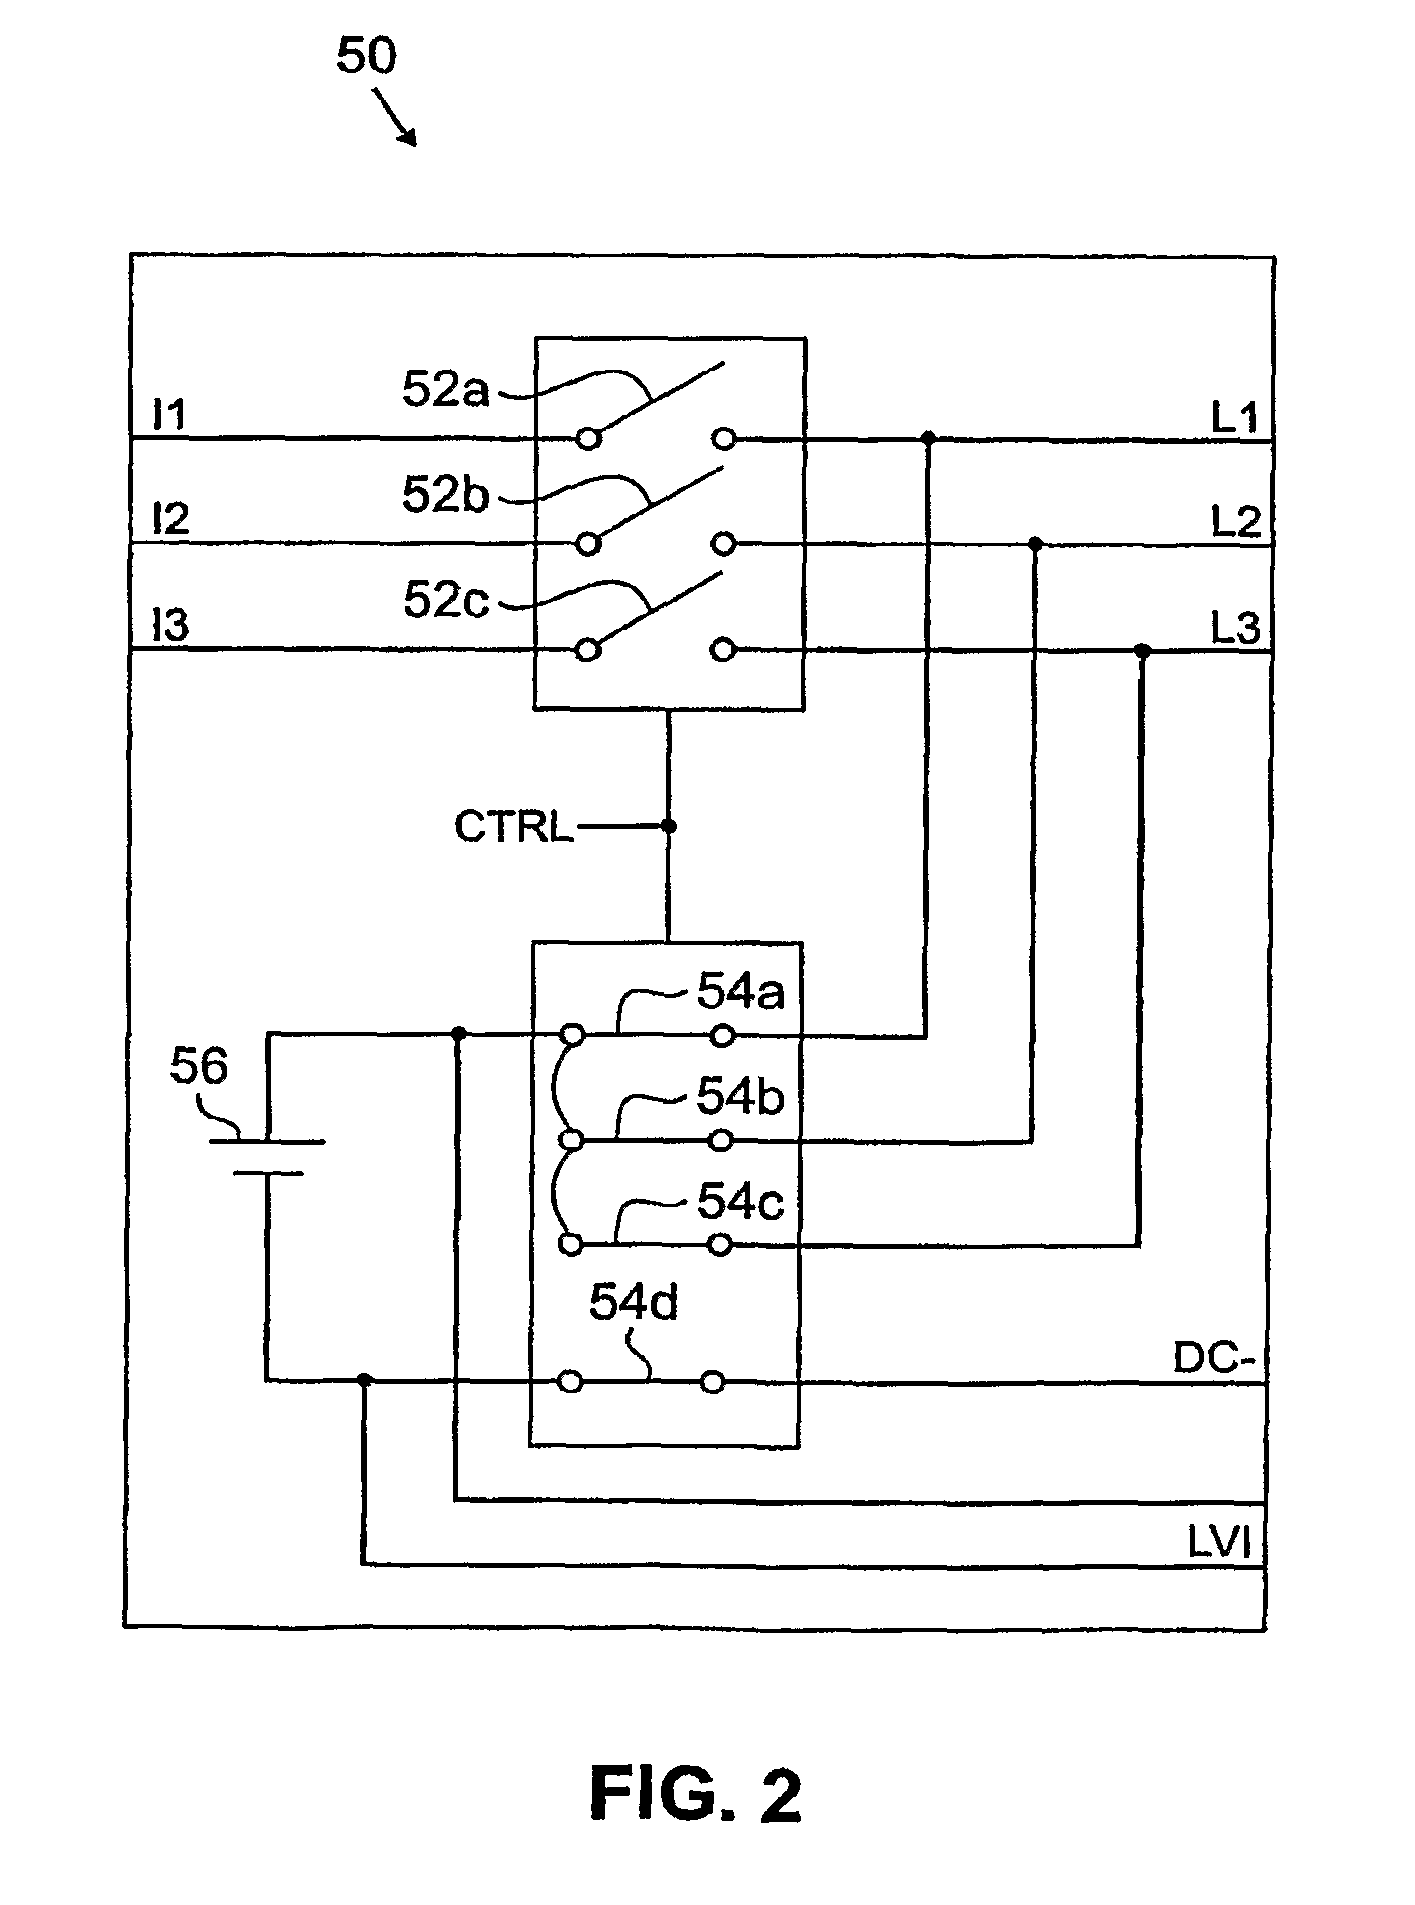 Elevator system including regenerative drive and rescue operation circuit for normal and power failure conditions